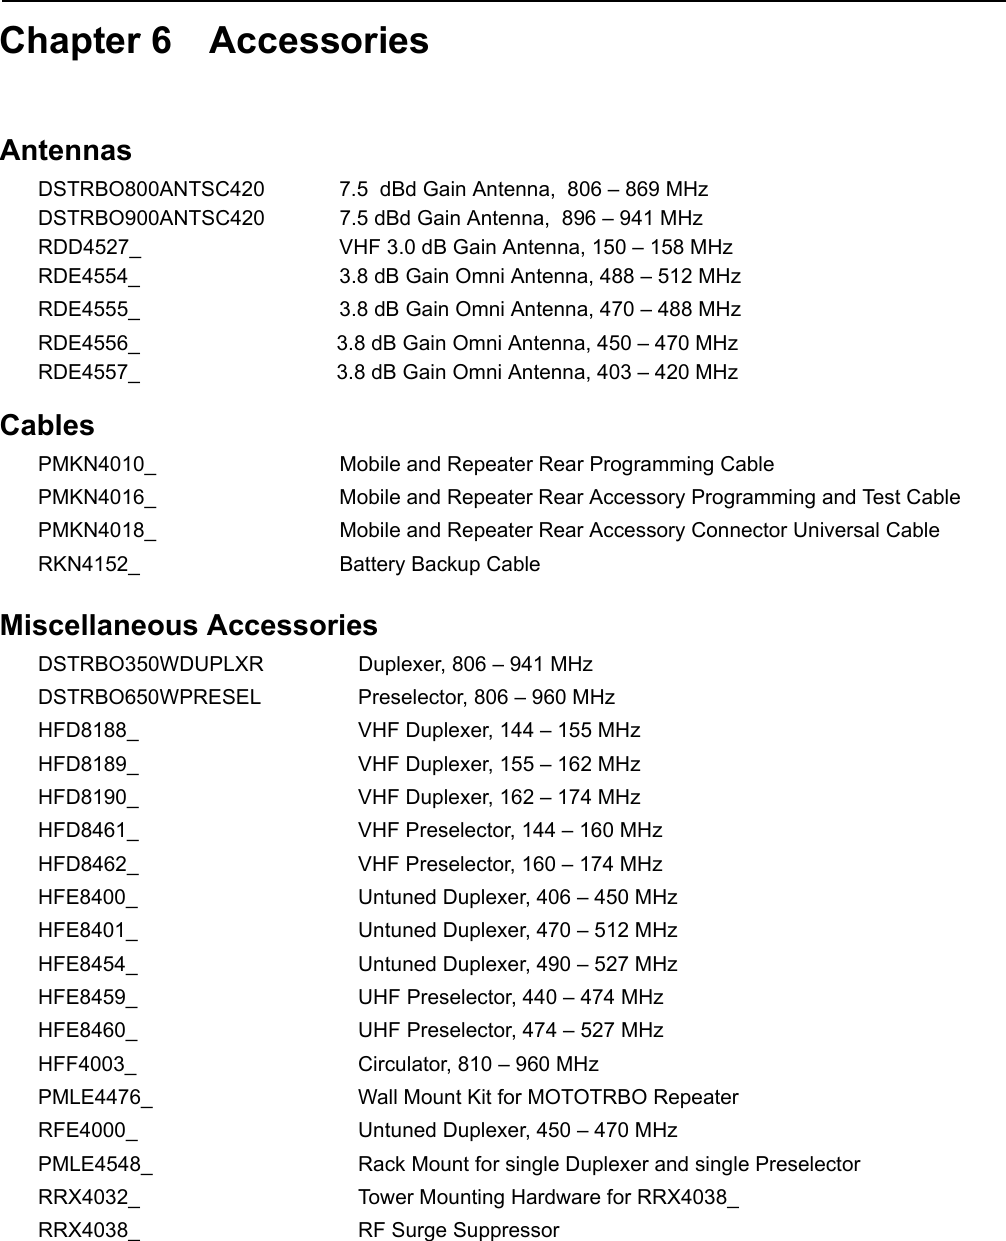 Chapter 6 AccessoriesAntennasDSTRBO800ANTSC420 7.5  dBd Gain Antenna,  806 – 869 MHzDSTRBO900ANTSC420  7.5 dBd Gain Antenna,  896 – 941 MHz  RDD4527_  VHF 3.0 dB Gain Antenna, 150 – 158 MHzRDE4554_  3.8 dB Gain Omni Antenna, 488 – 512 MHzRDE4555_  3.8 dB Gain Omni Antenna, 470 – 488 MHzRDE4556_        3.8 dB Gain Omni Antenna, 450 – 470 MHzRDE4557_        3.8 dB Gain Omni Antenna, 403 – 420 MHzCablesPMKN4010_ Mobile and Repeater Rear Programming Cable PMKN4016_ Mobile and Repeater Rear Accessory Programming and Test Cable PMKN4018_ Mobile and Repeater Rear Accessory Connector Universal Cable RKN4152_ Battery Backup Cable Miscellaneous AccessoriesDSTRBO350WDUPLXR Duplexer, 806 – 941 MHzDSTRBO650WPRESEL Preselector, 806 – 960 MHzHFD8188_  VHF Duplexer, 144 – 155 MHzHFD8189_  VHF Duplexer, 155 – 162 MHzHFD8190_  VHF Duplexer, 162 – 174 MHzHFD8461_  VHF Preselector, 144 – 160 MHzHFD8462_  VHF Preselector, 160 – 174 MHzHFE8400_  Untuned Duplexer, 406 – 450 MHzHFE8401_  Untuned Duplexer, 470 – 512 MHzHFE8454_  Untuned Duplexer, 490 – 527 MHzHFE8459_  UHF Preselector, 440 – 474 MHzHFE8460_  UHF Preselector, 474 – 527 MHzHFF4003_ Circulator, 810 – 960 MHzPMLE4476_ Wall Mount Kit for MOTOTRBO RepeaterRFE4000_ Untuned Duplexer, 450 – 470 MHzPMLE4548_ Rack Mount for single Duplexer and single PreselectorRRX4032_ Tower Mounting Hardware for RRX4038_RRX4038_ RF Surge Suppressor